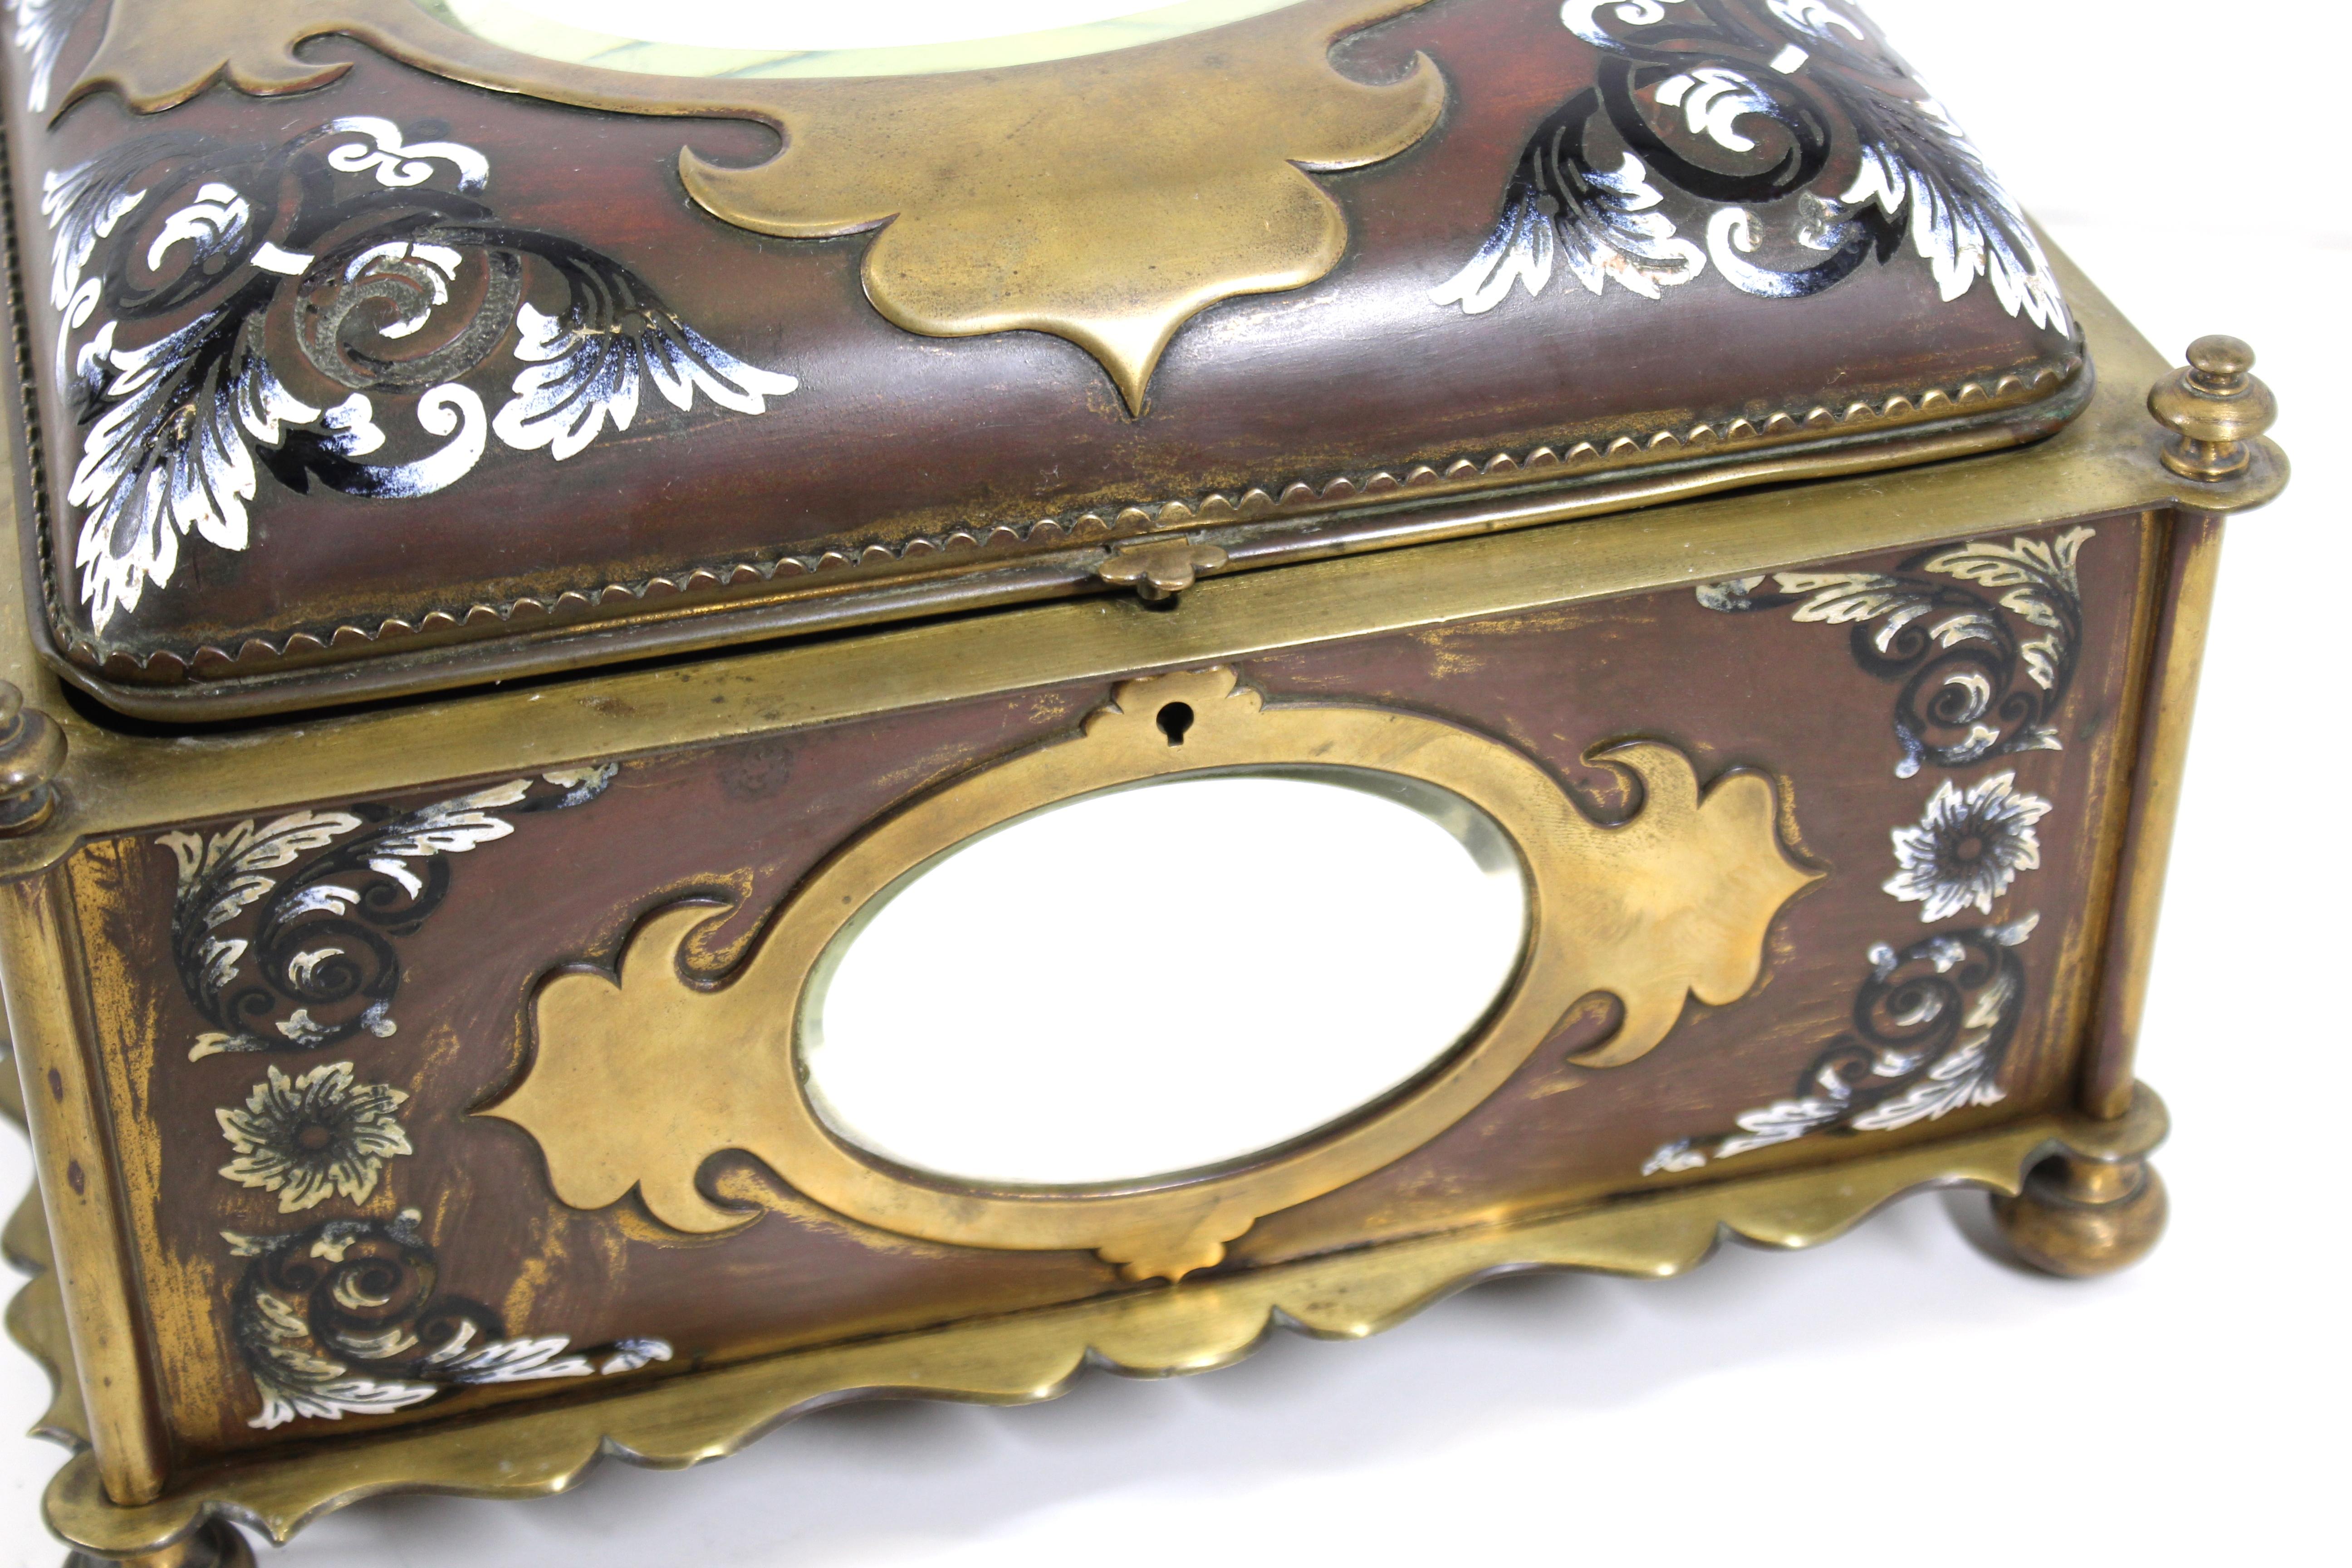 French Renaissance Revival Champleve Enamel Jewelry Box with Oval Mirror Inserts For Sale 5